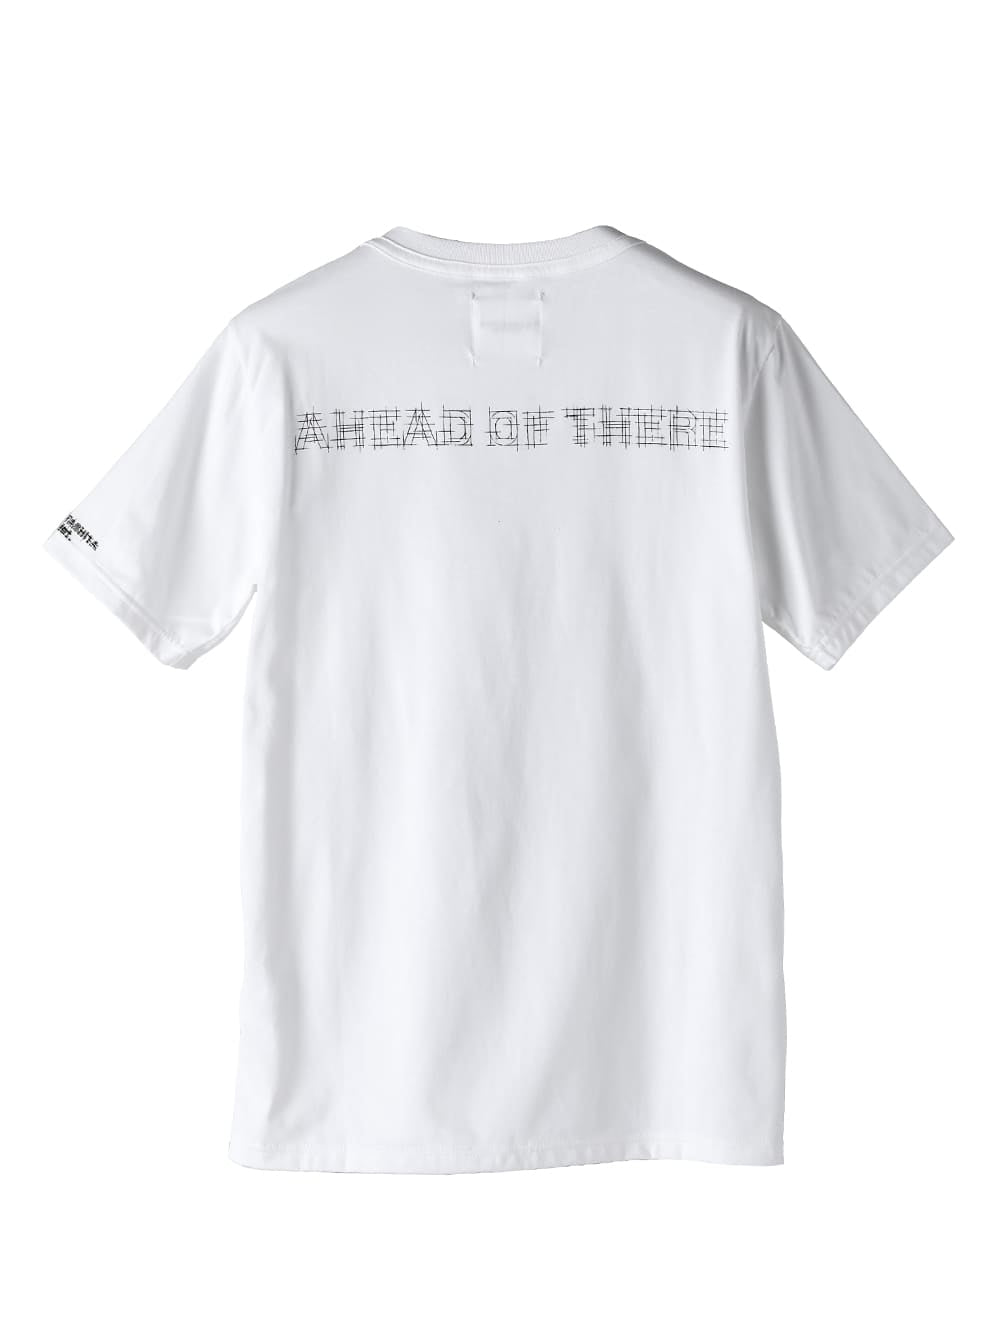 Ahead of there. (s/s pocket tee)